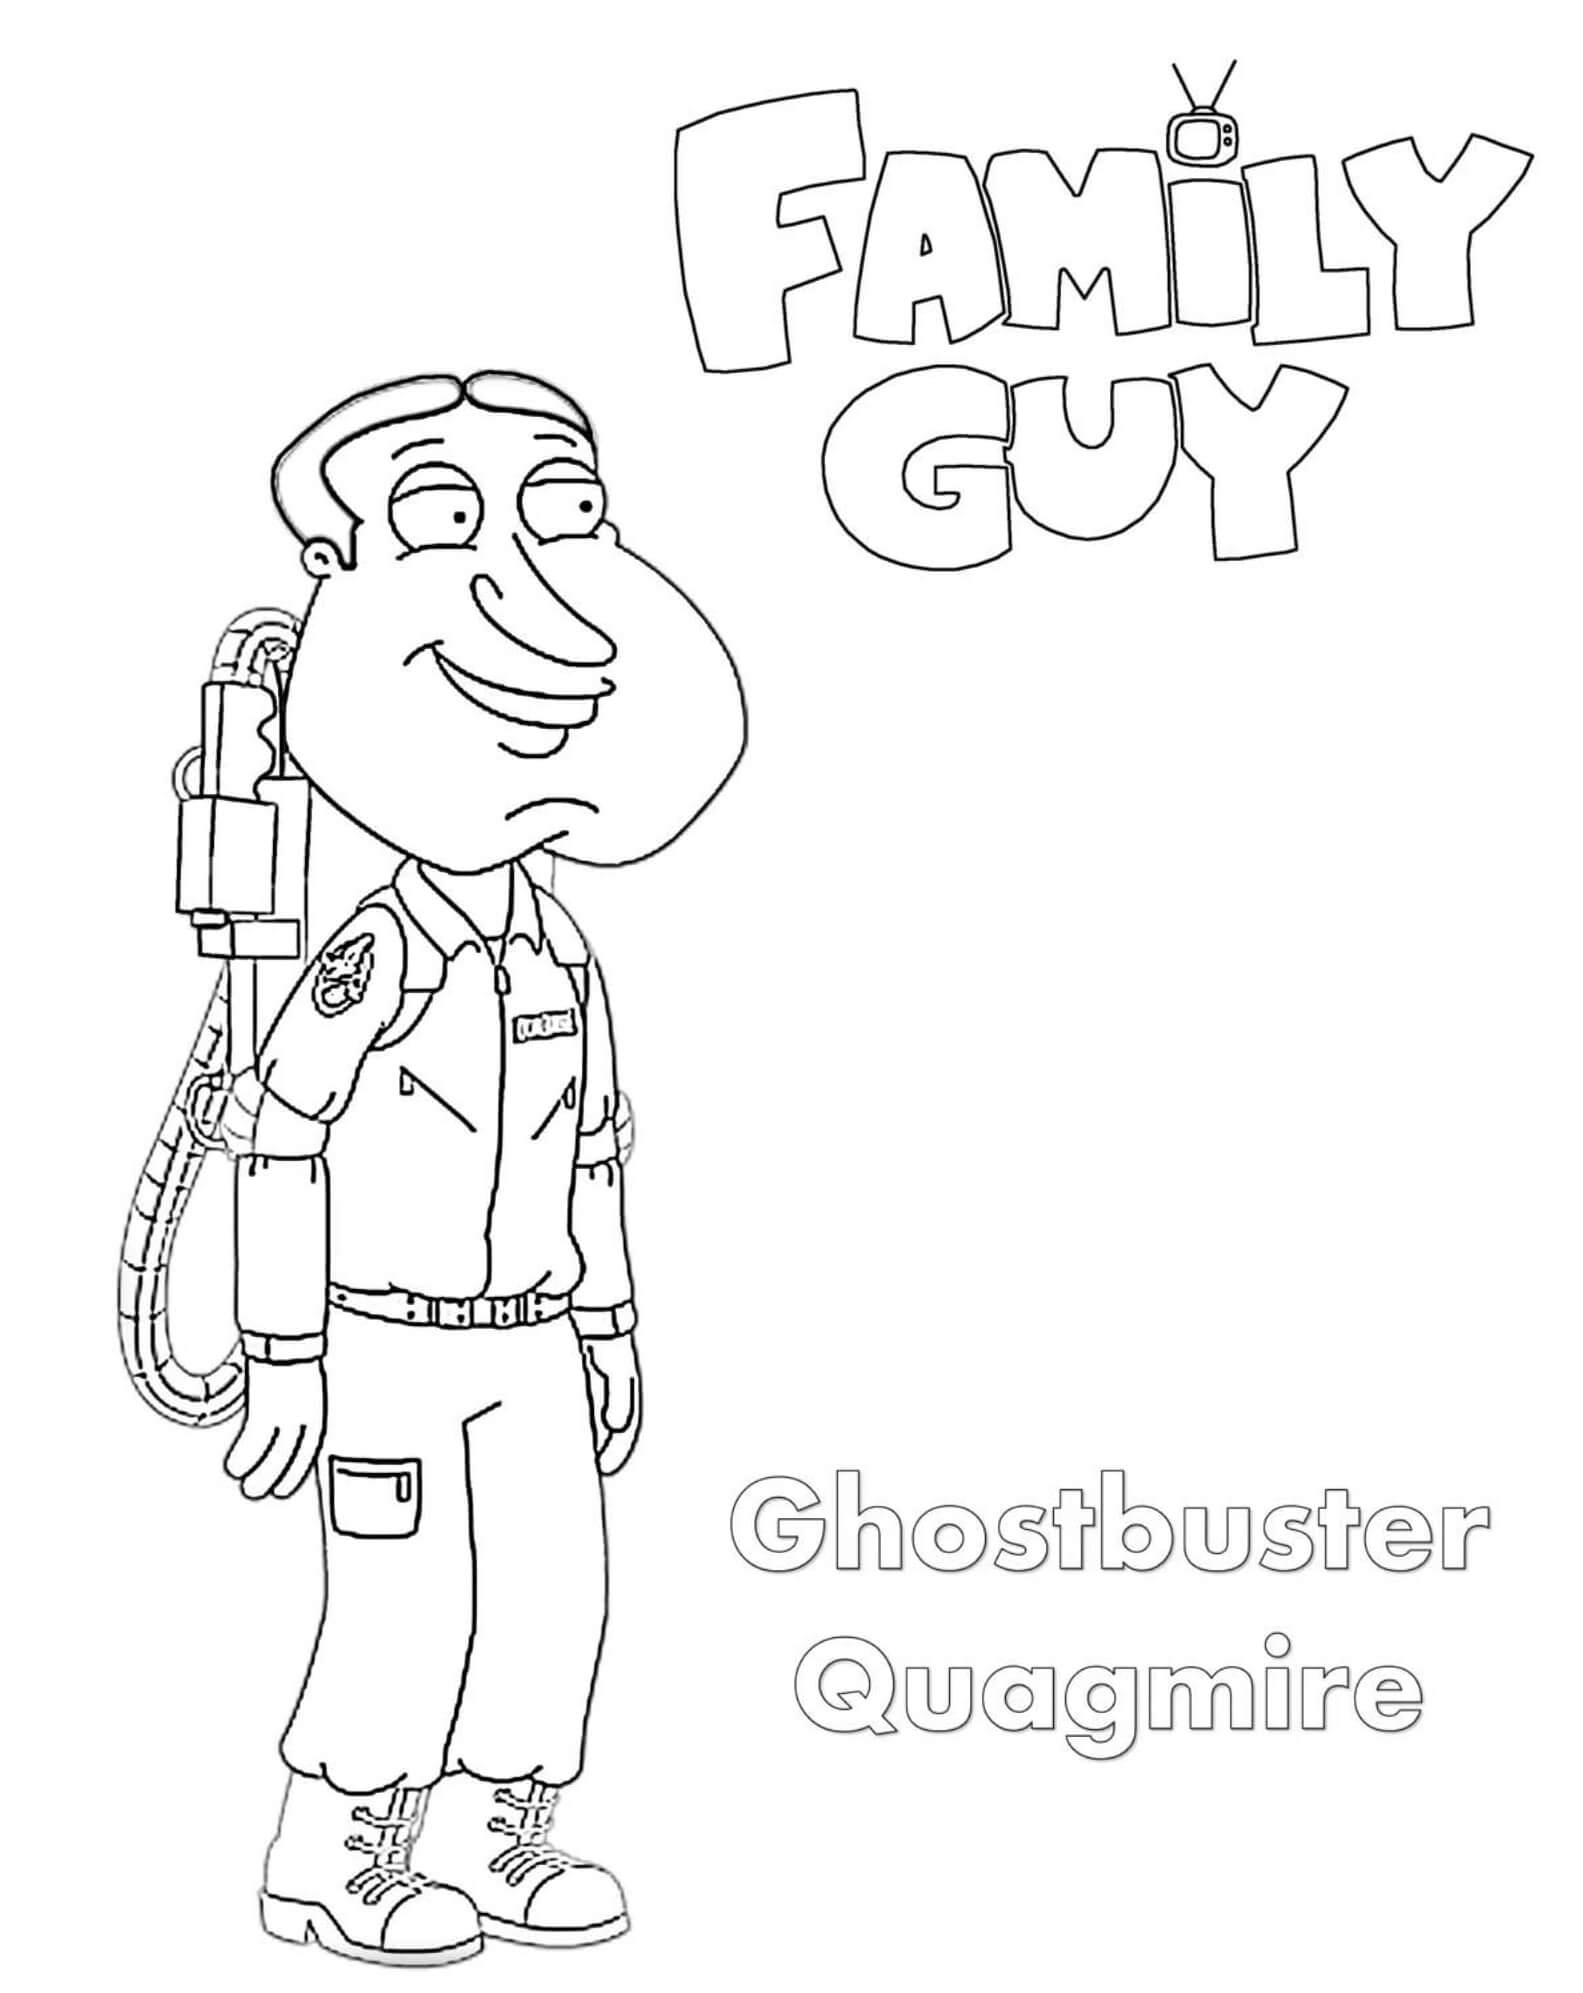 Family Guy Ghostbusters Quagmire